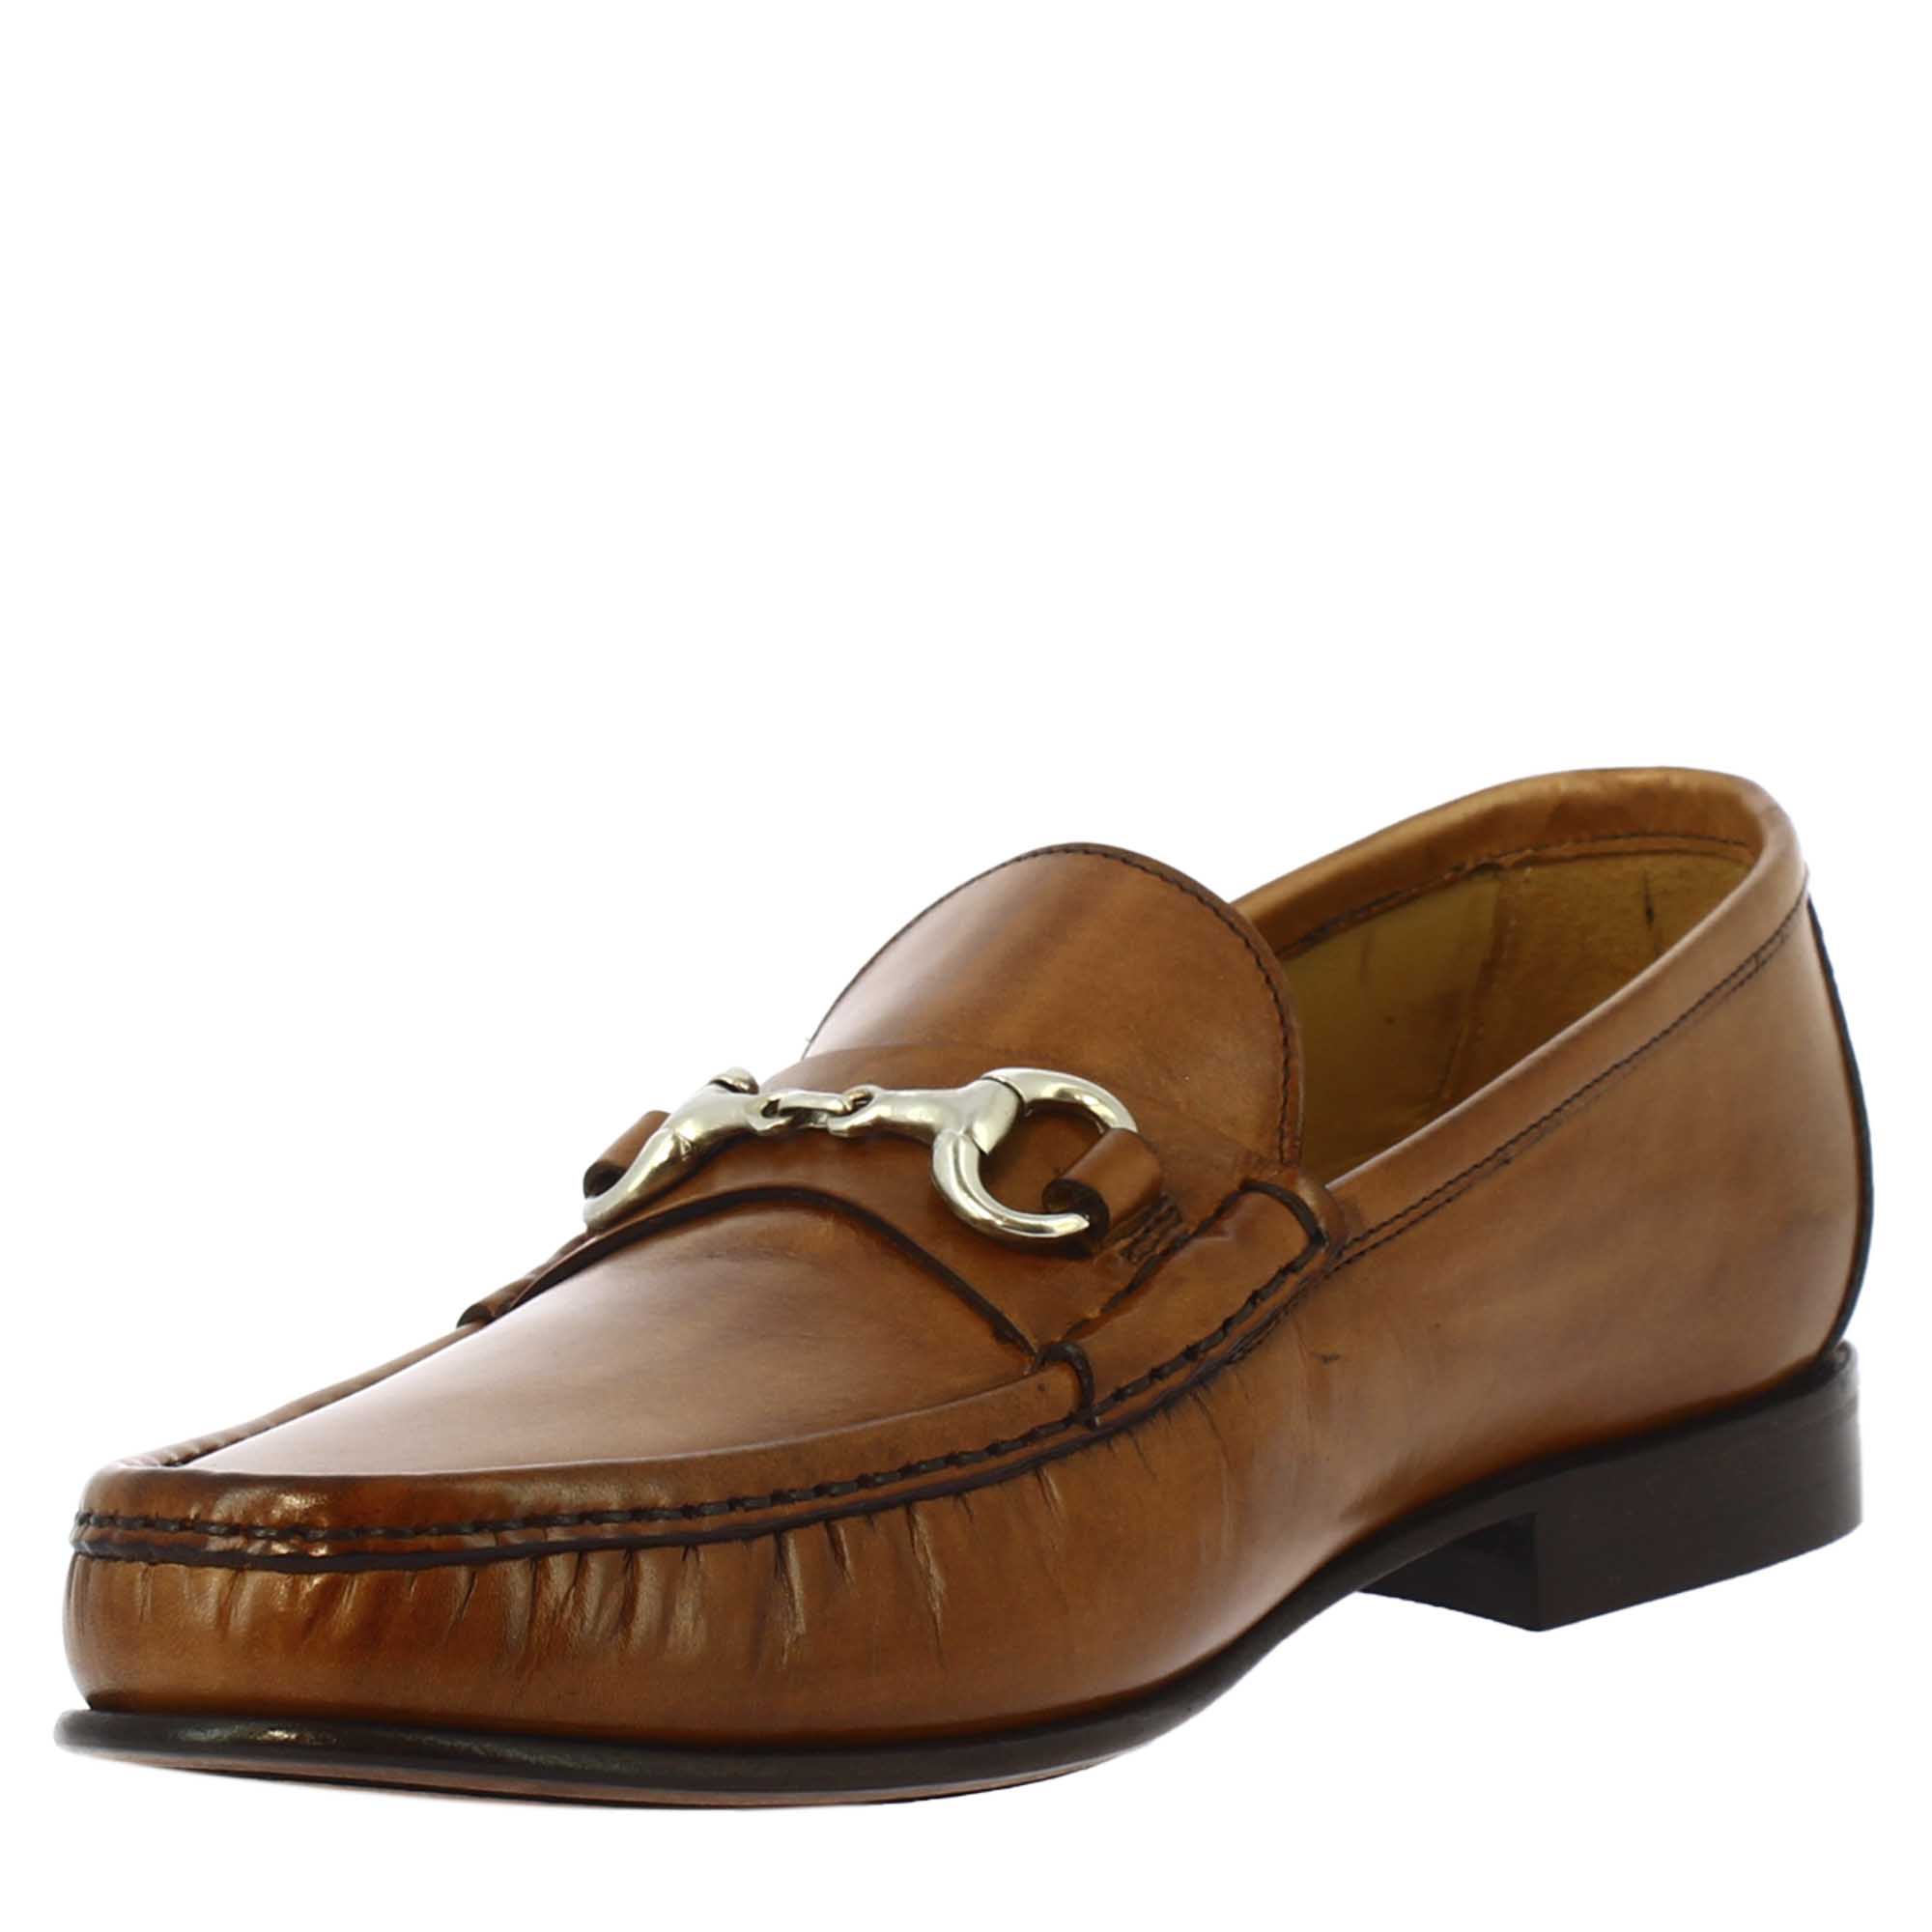 Handmade men's loafers in brown calf LEATHER